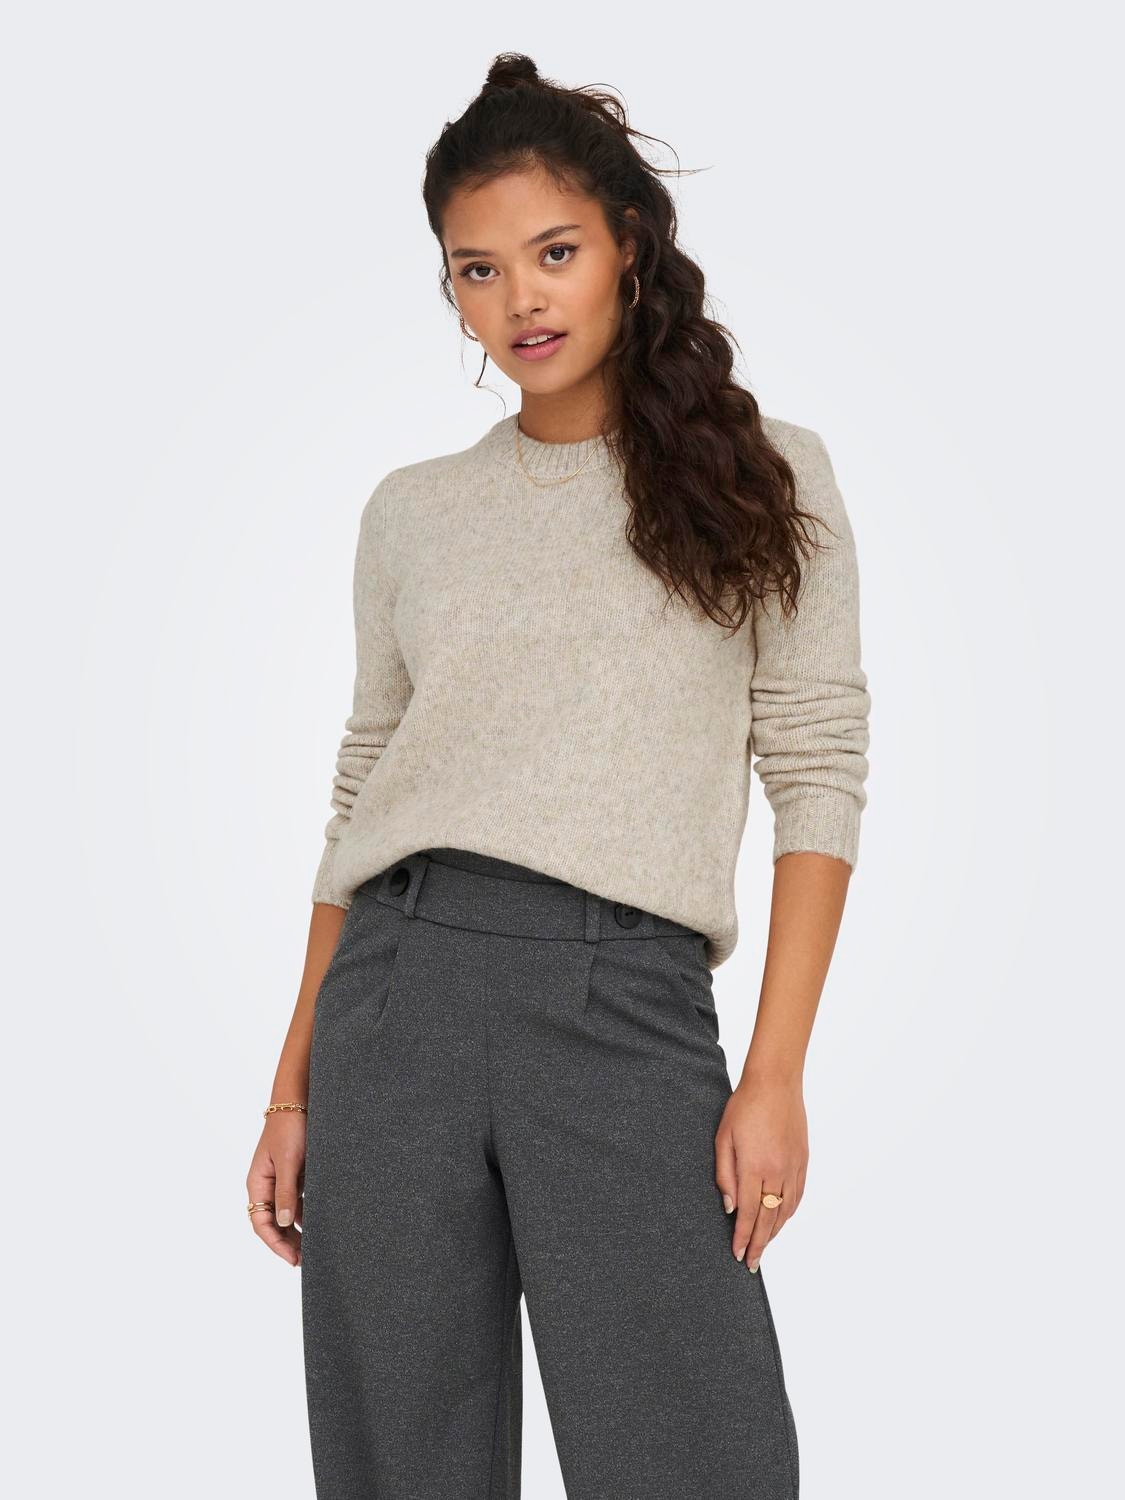 ONLY Pull-overs Knit Fit Col rond Poignets côtelés -Oatmeal - 15277866